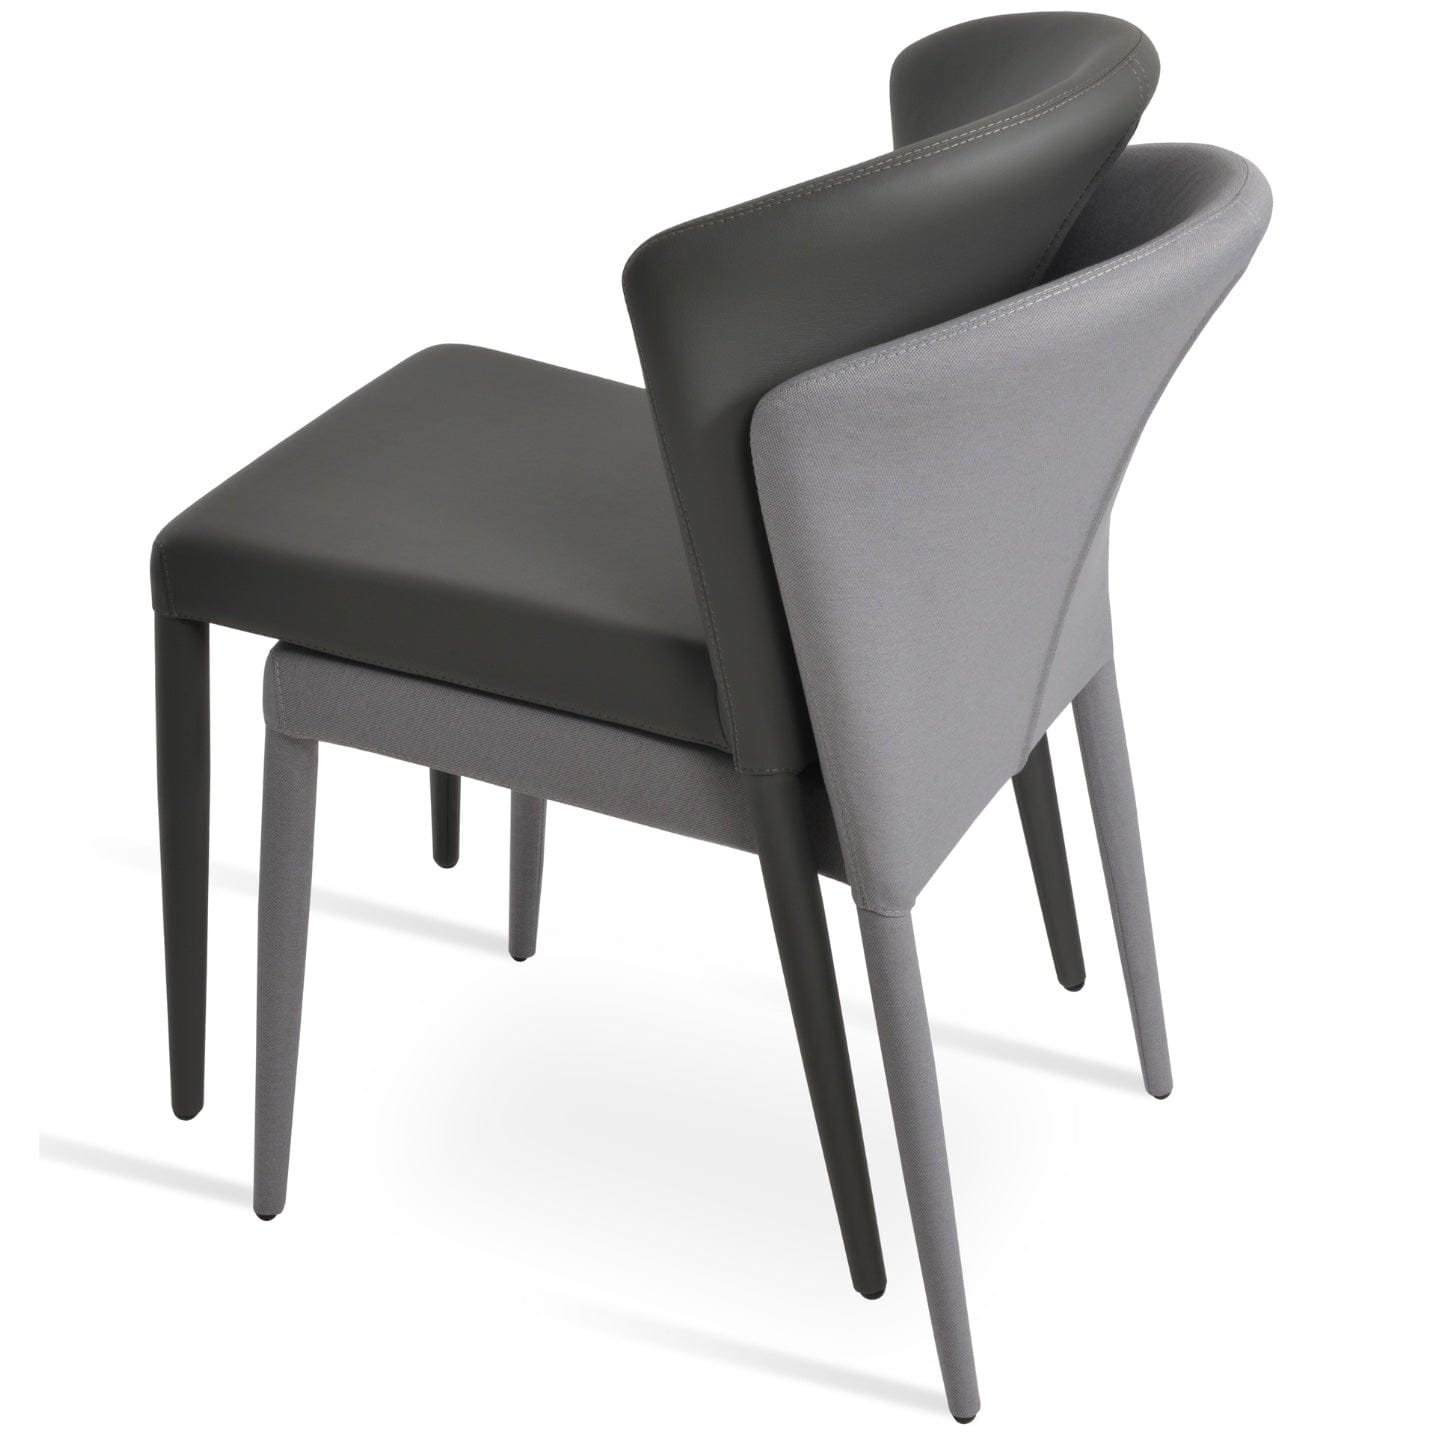 sohoConcept Kitchen & Dining Room Chairs Capri Stackable Restaurant Chairs | Grey Leather Metal Dining Chairs